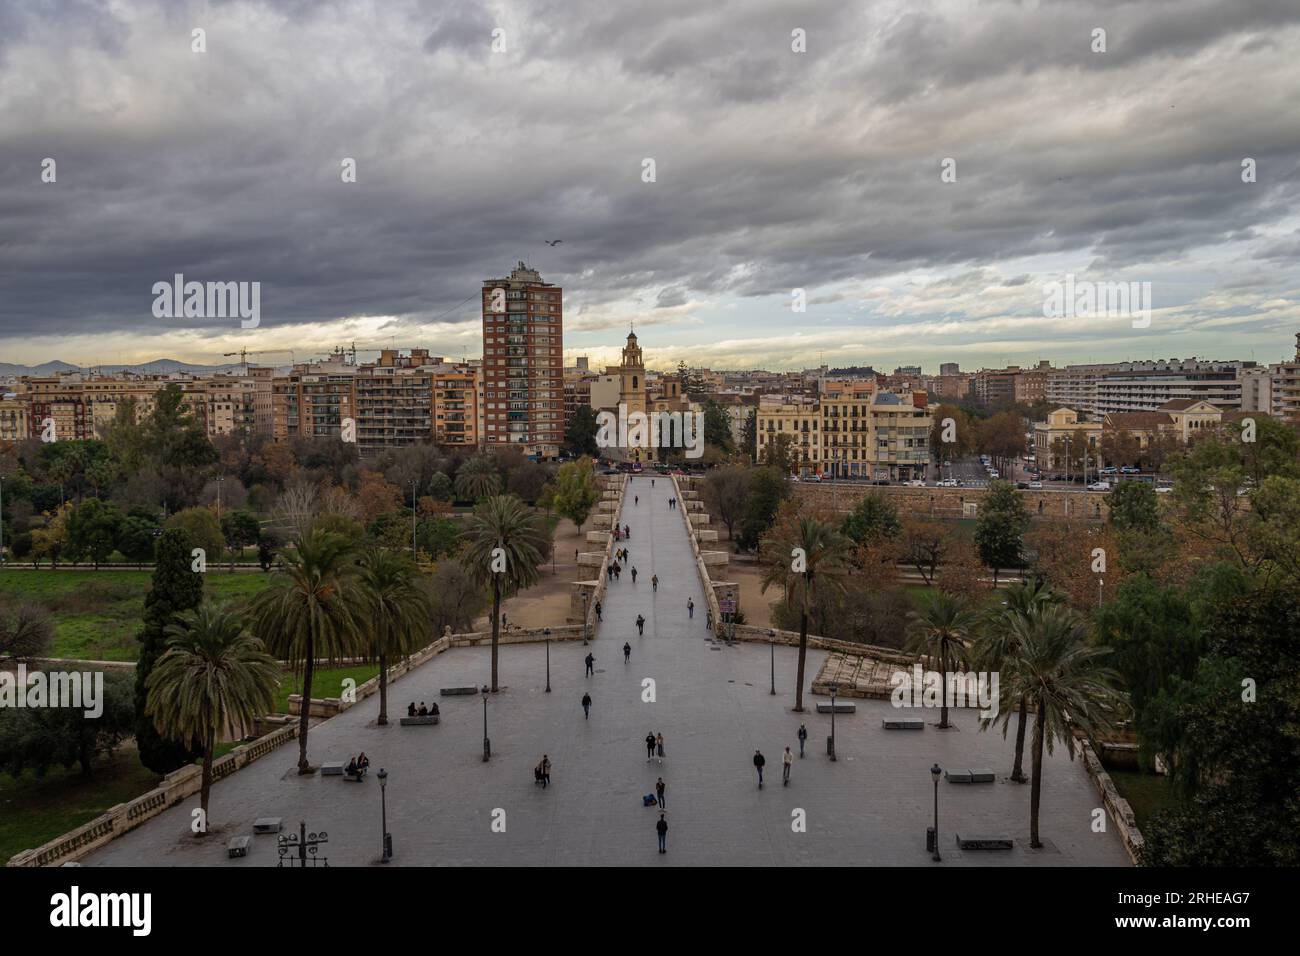 Valencia, Spain - 12 December 2022: View from the Serranos tower over the Serranos bridge with cloudy cityscape Stock Photo